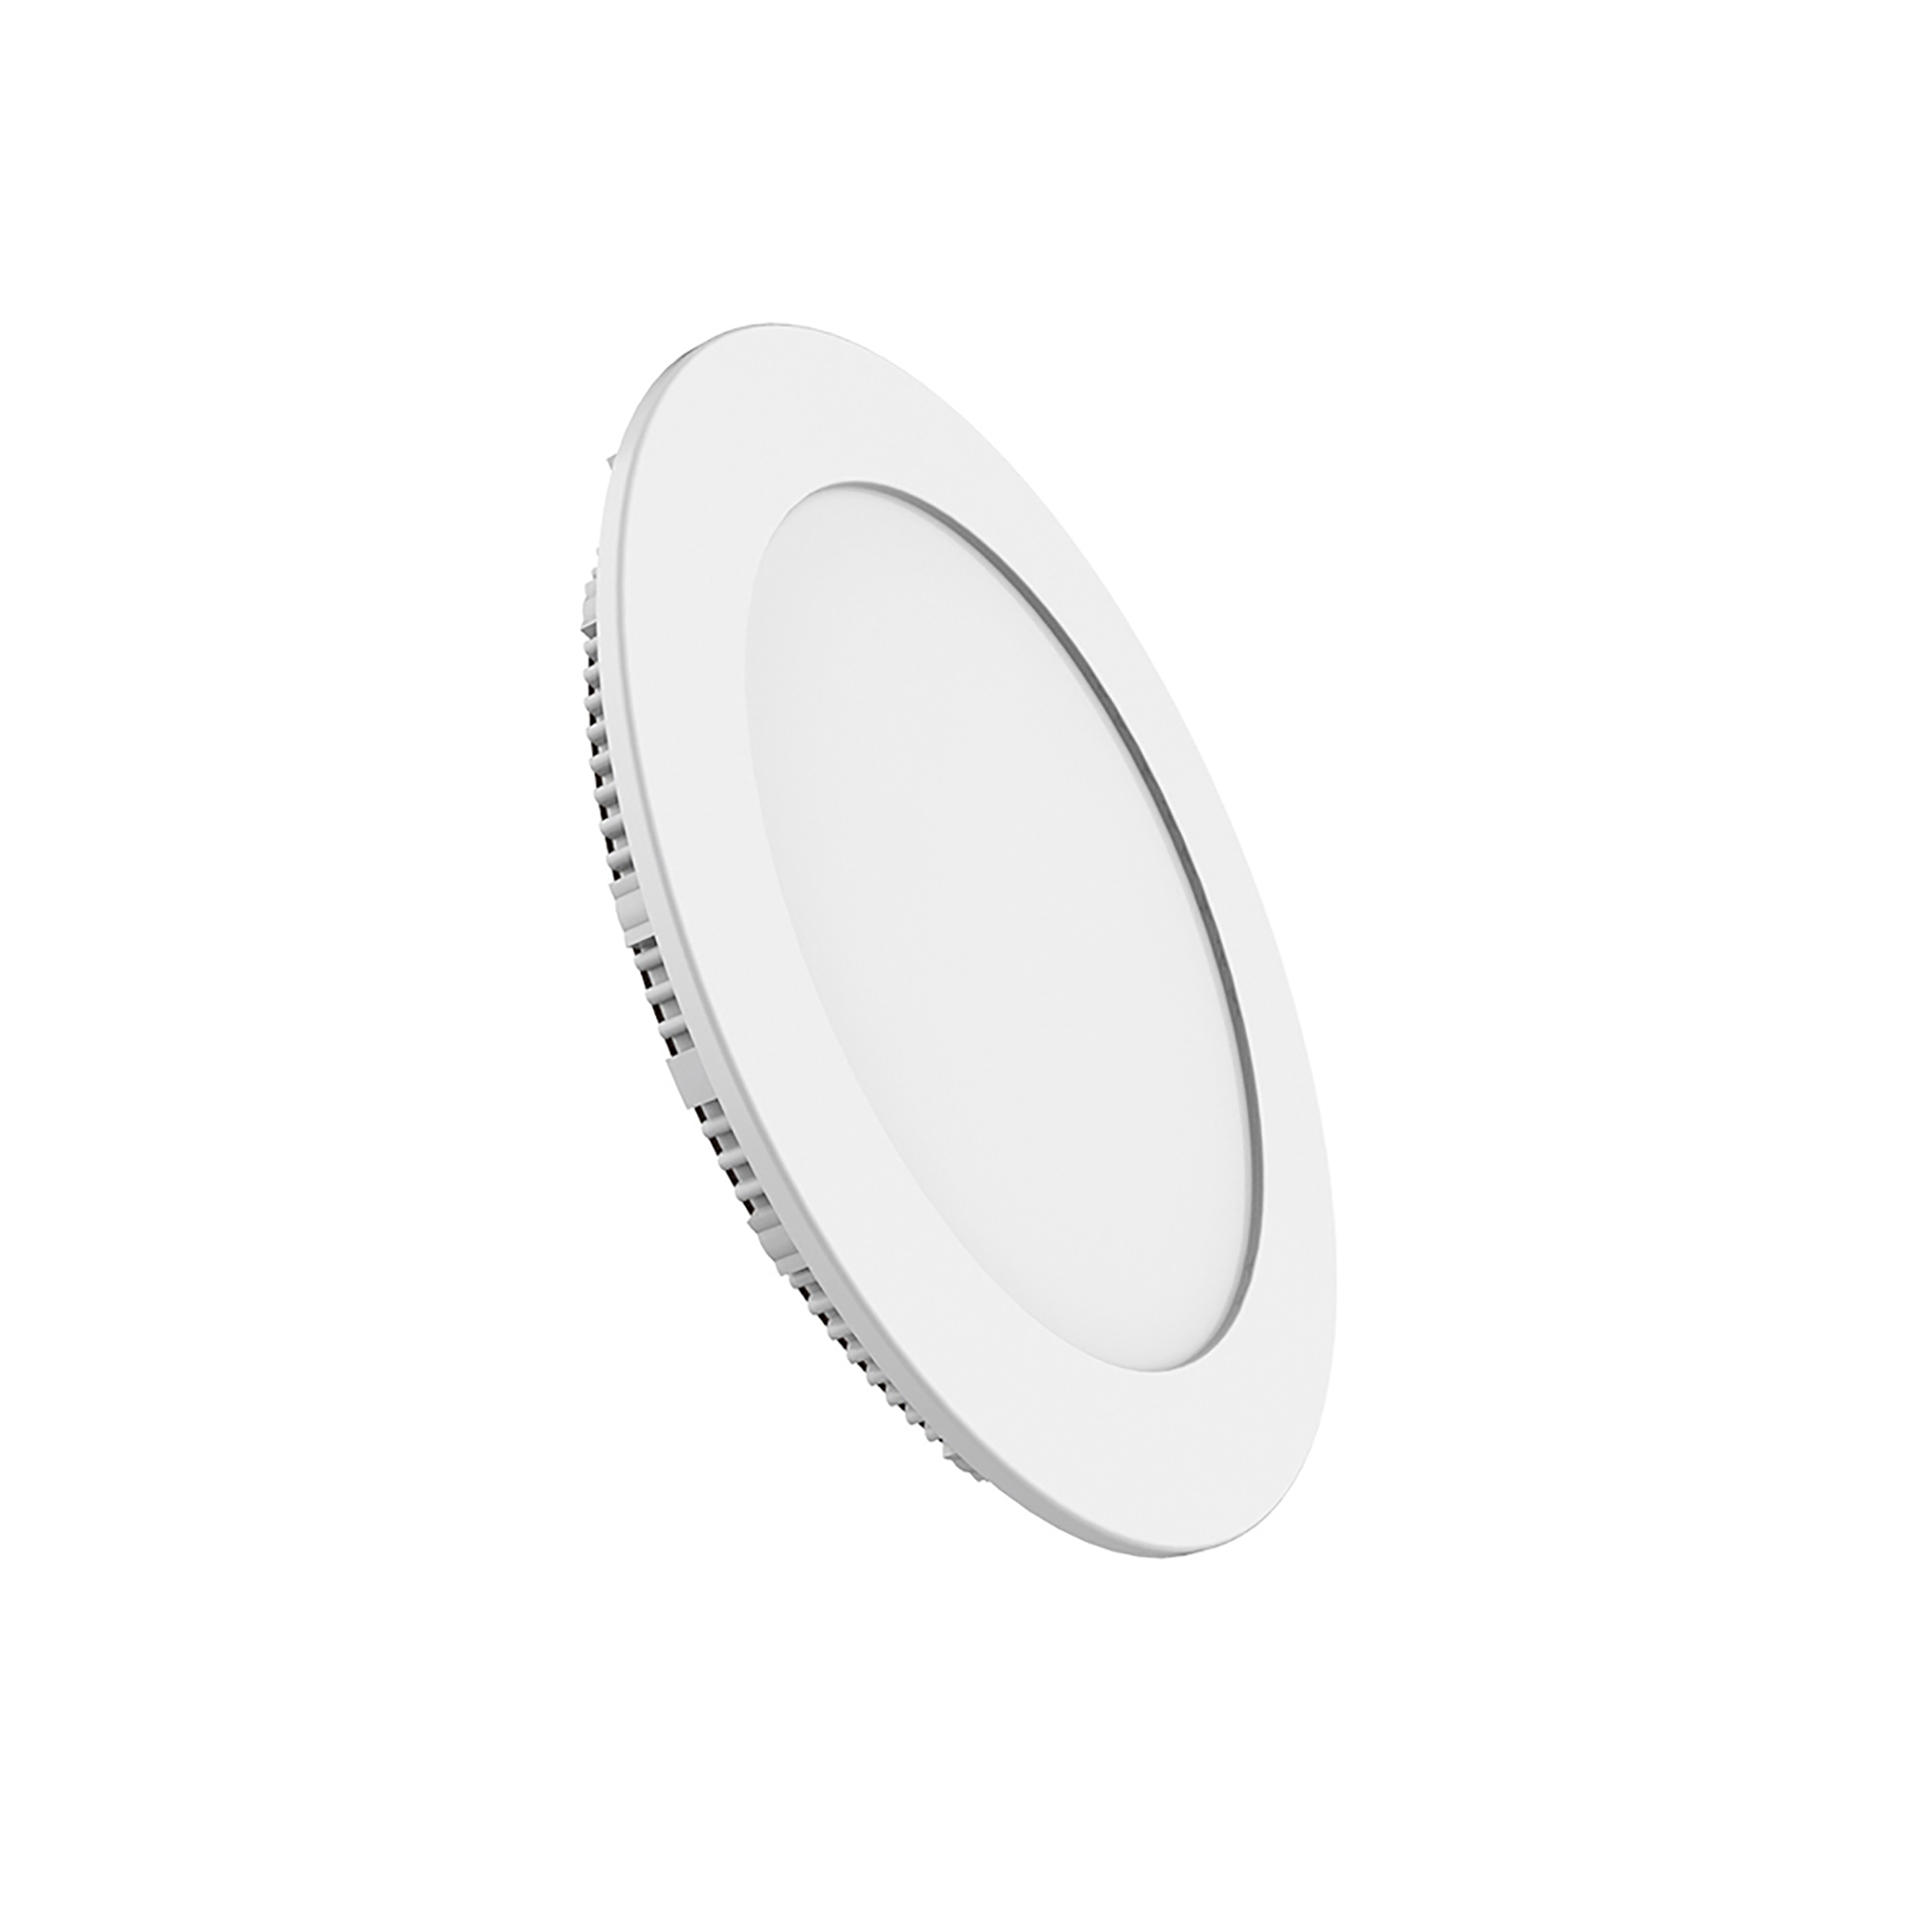 2061220010  Intego R Supervision Slim Recessed Round 170mm (6") 12W, 4000K, 120°, Cut-Out 150mm